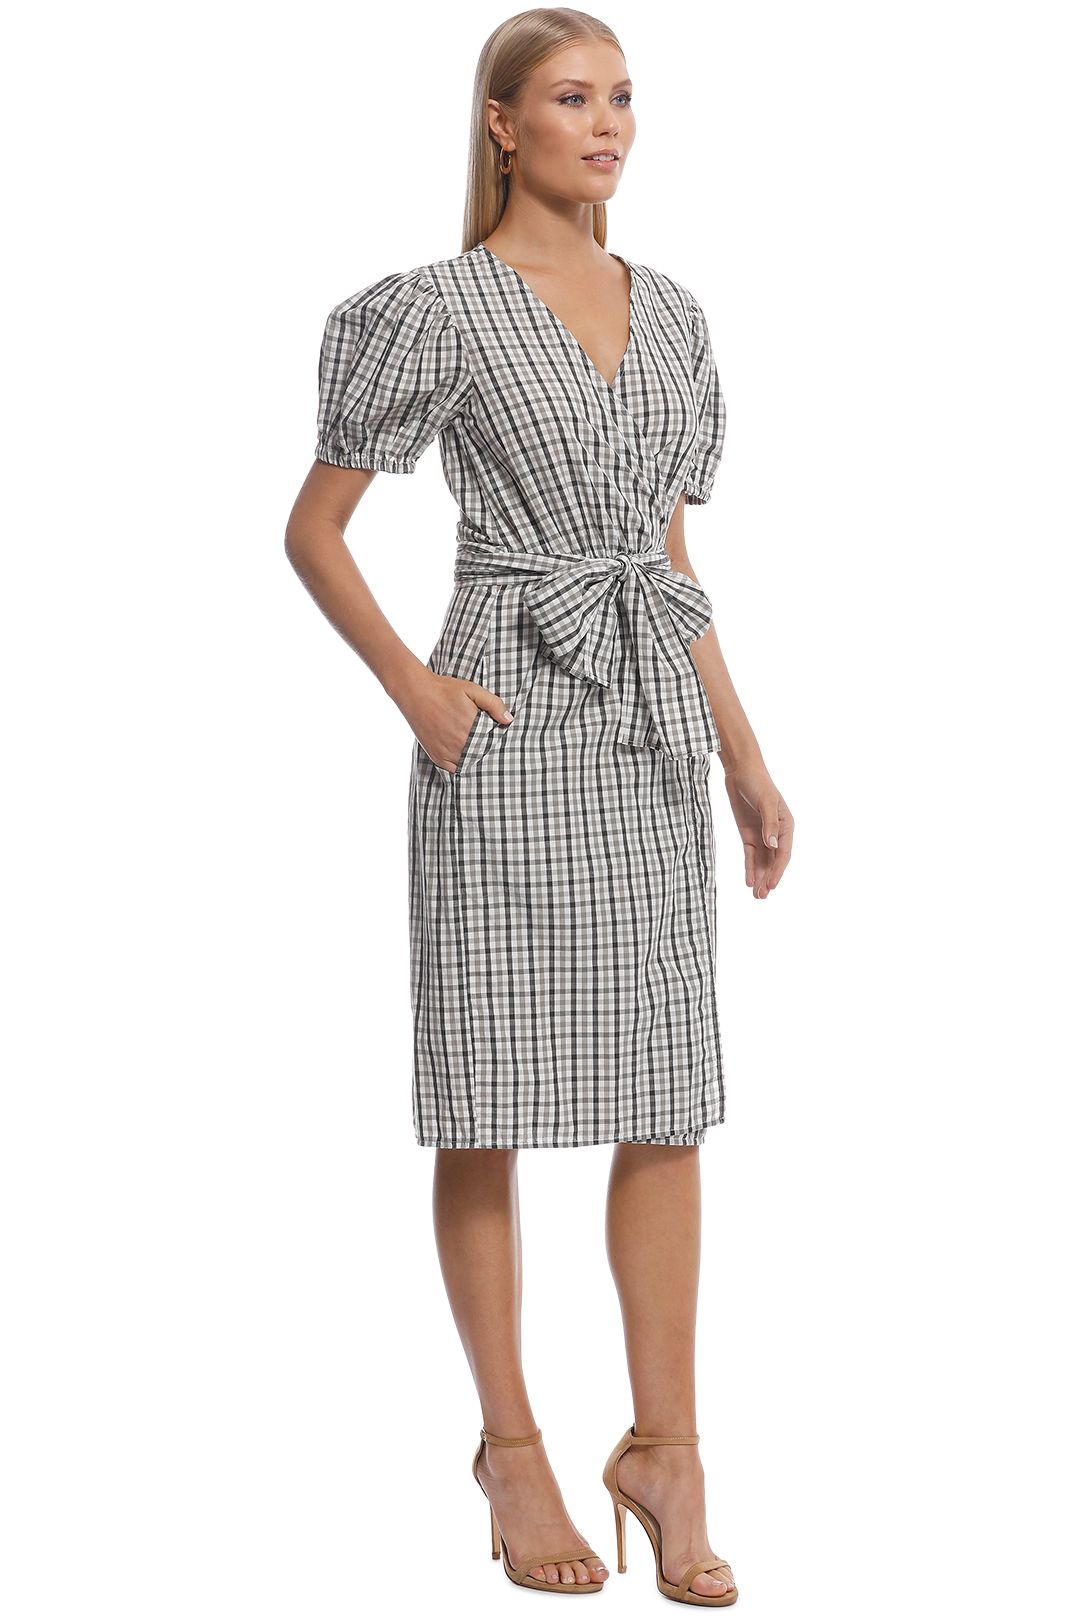 Scanlan Theodore - Gingham Wrap Front Dress - White - Side